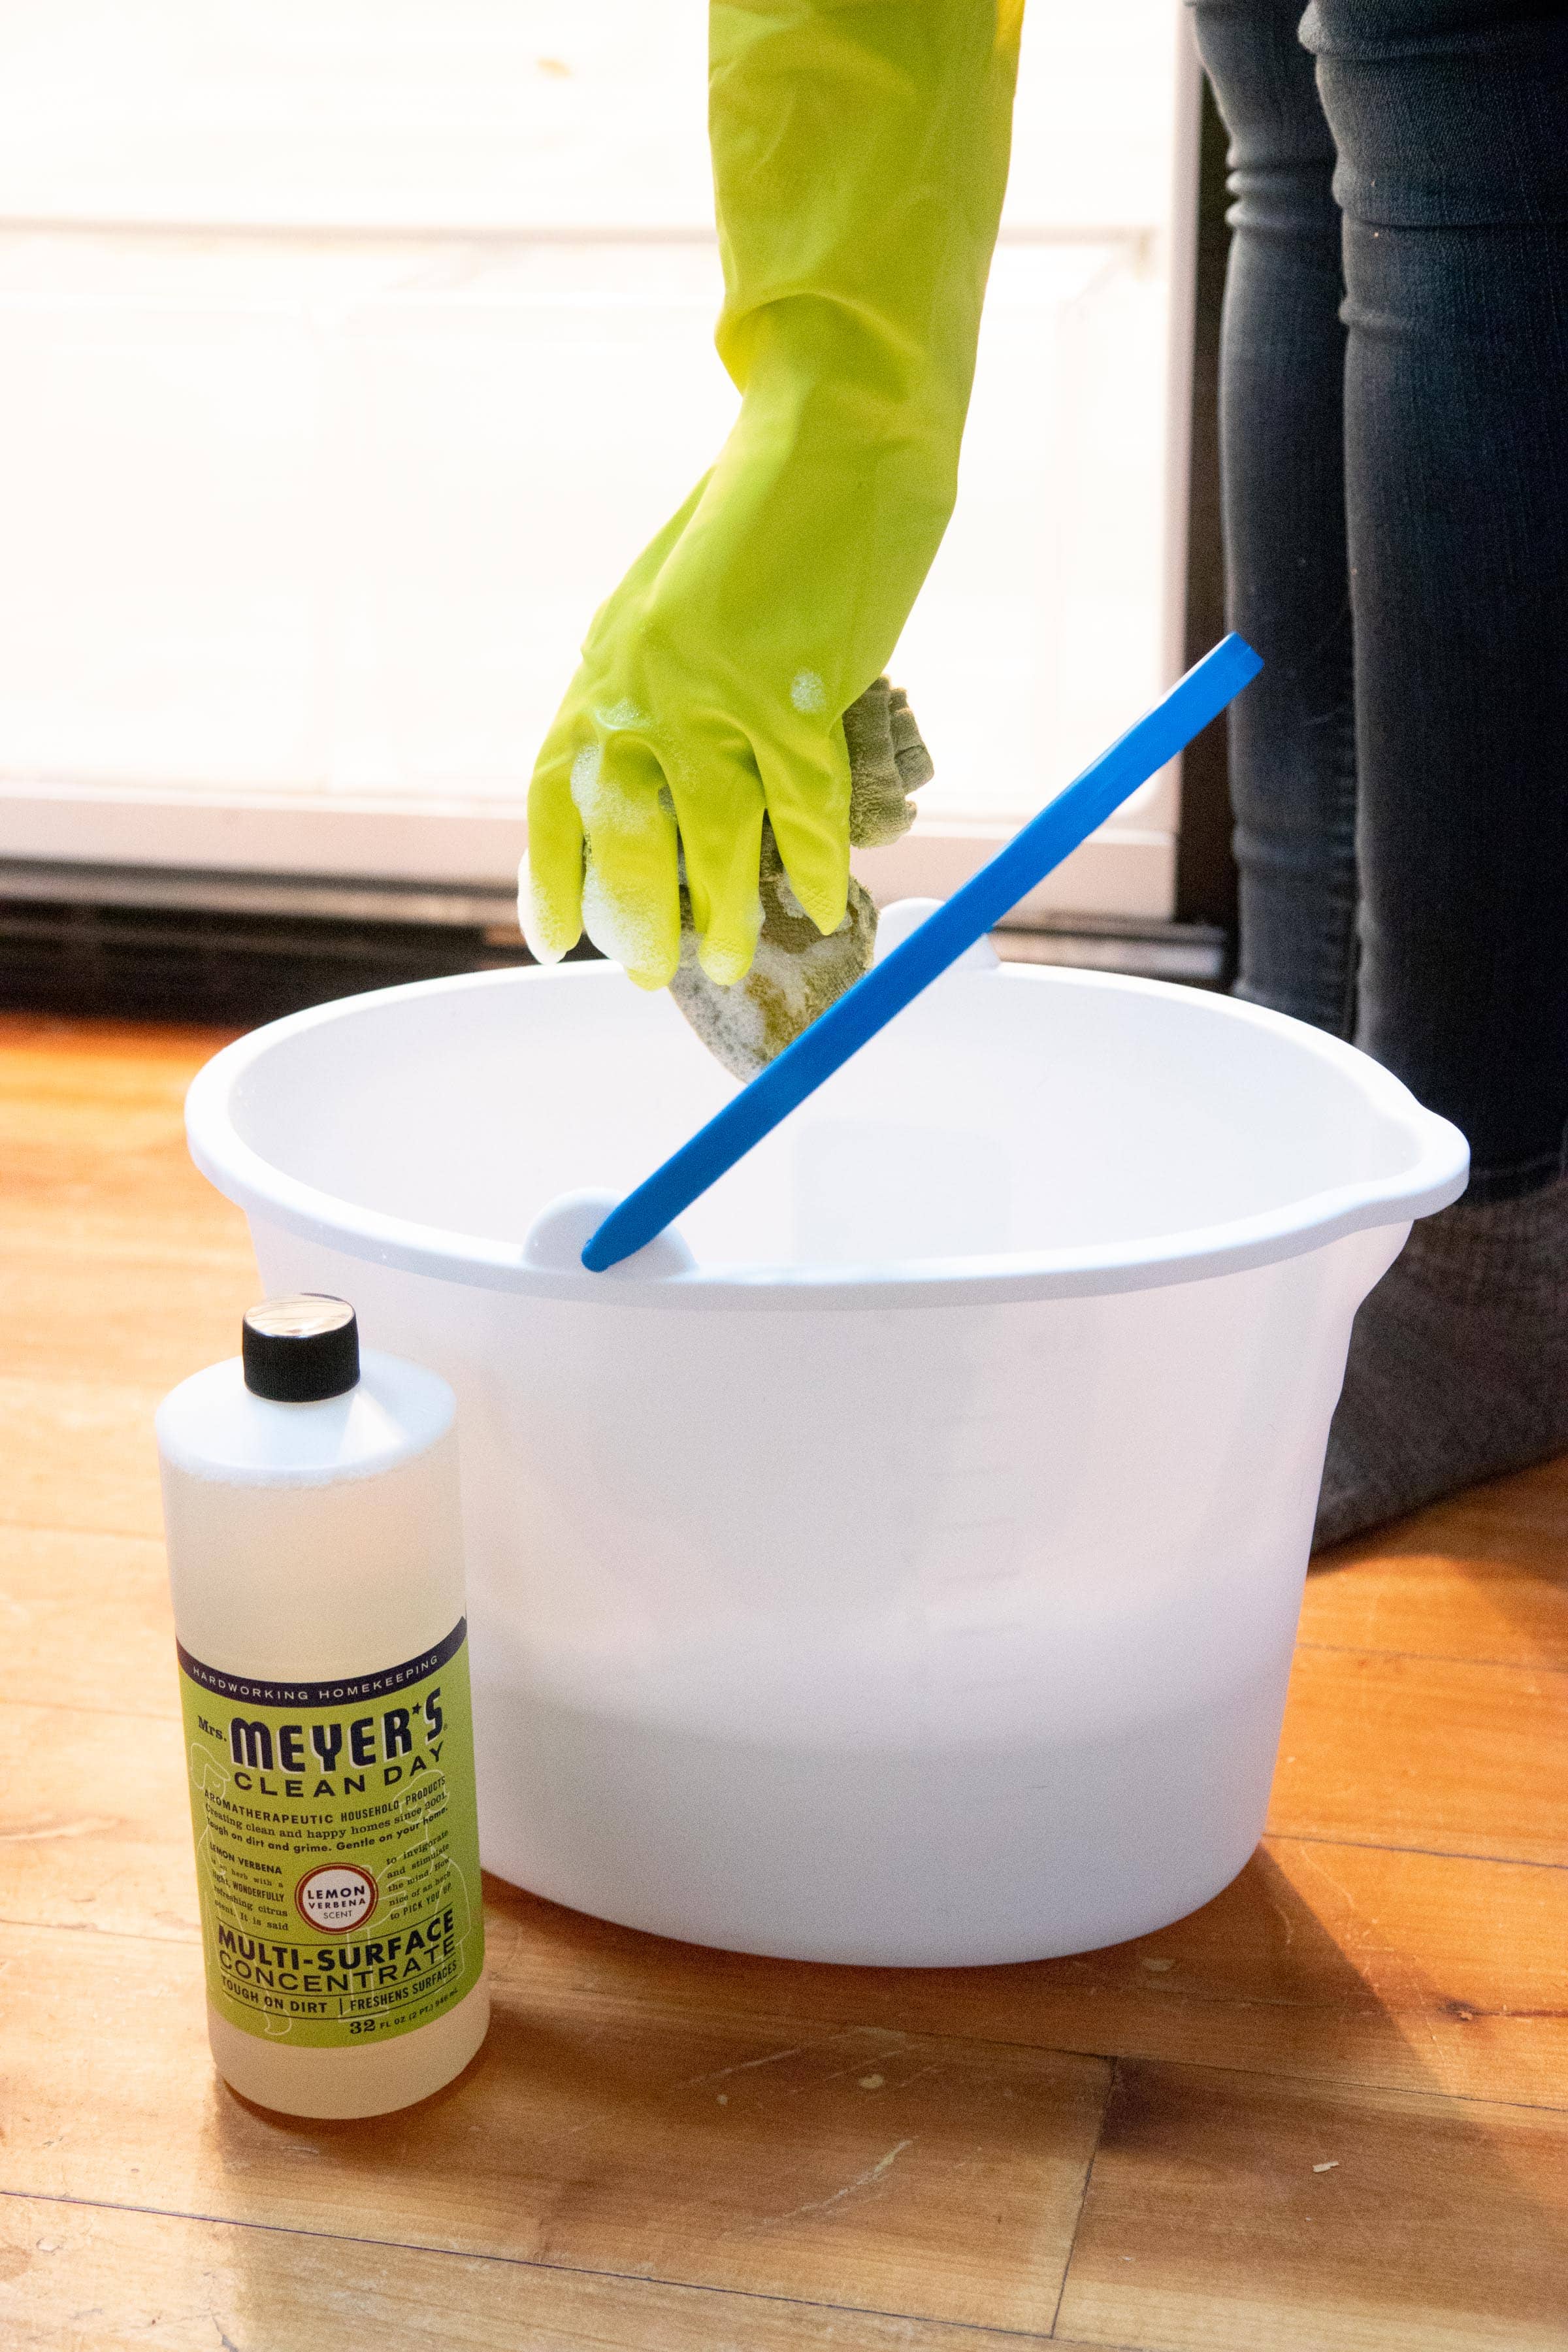 Hand in a lime green dish glove holding a soapy sponge above a mop bucket, with a bottle of Meyer's Clean Day all-purpose cleaner in front of it